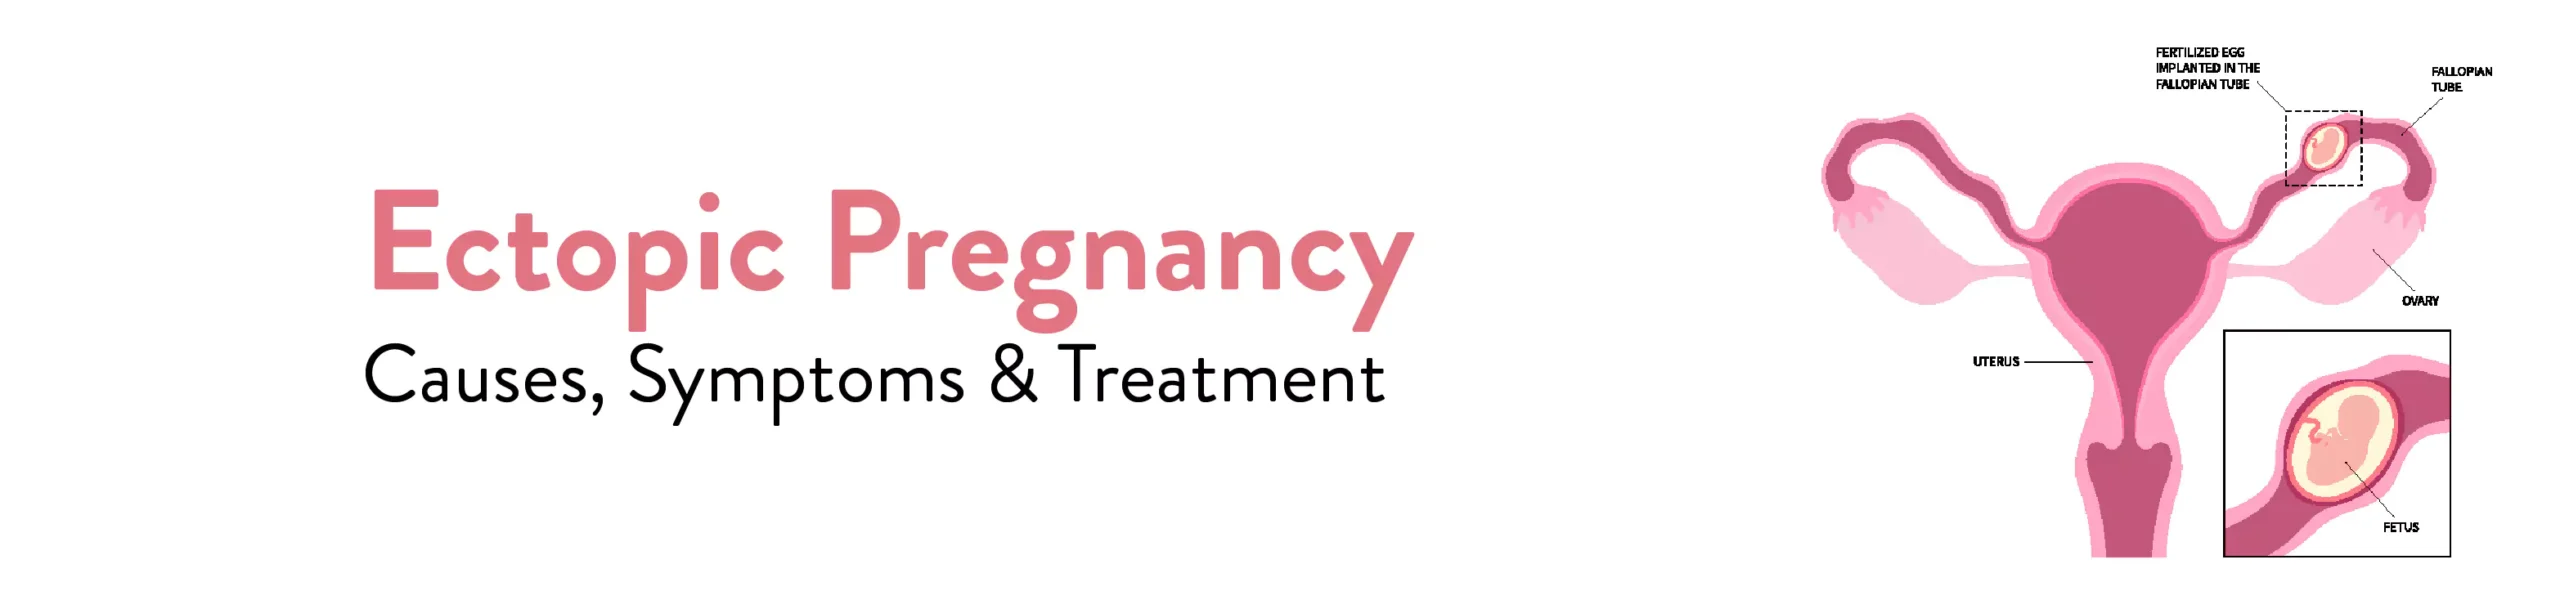 ectopic pregnancy causes symptoms and treatment